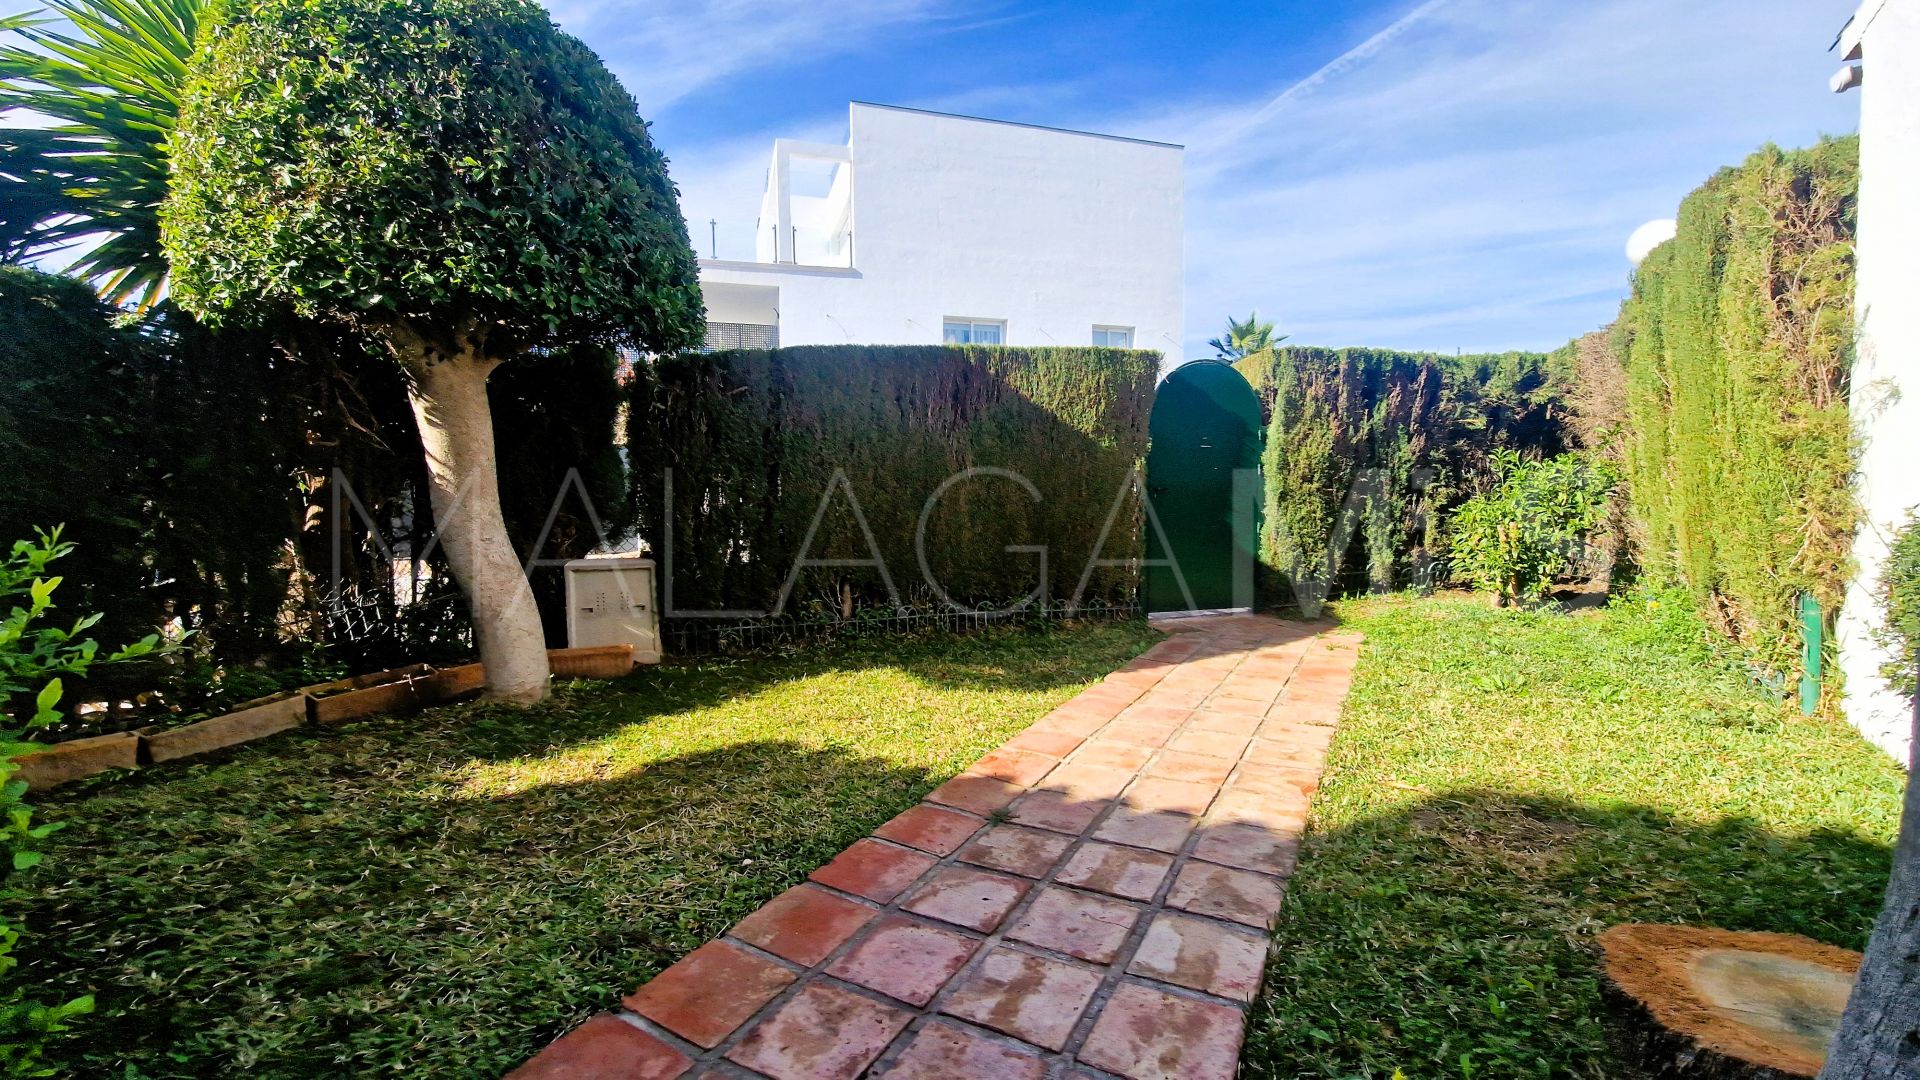 Adosado for sale in Bel Air with 4 bedrooms